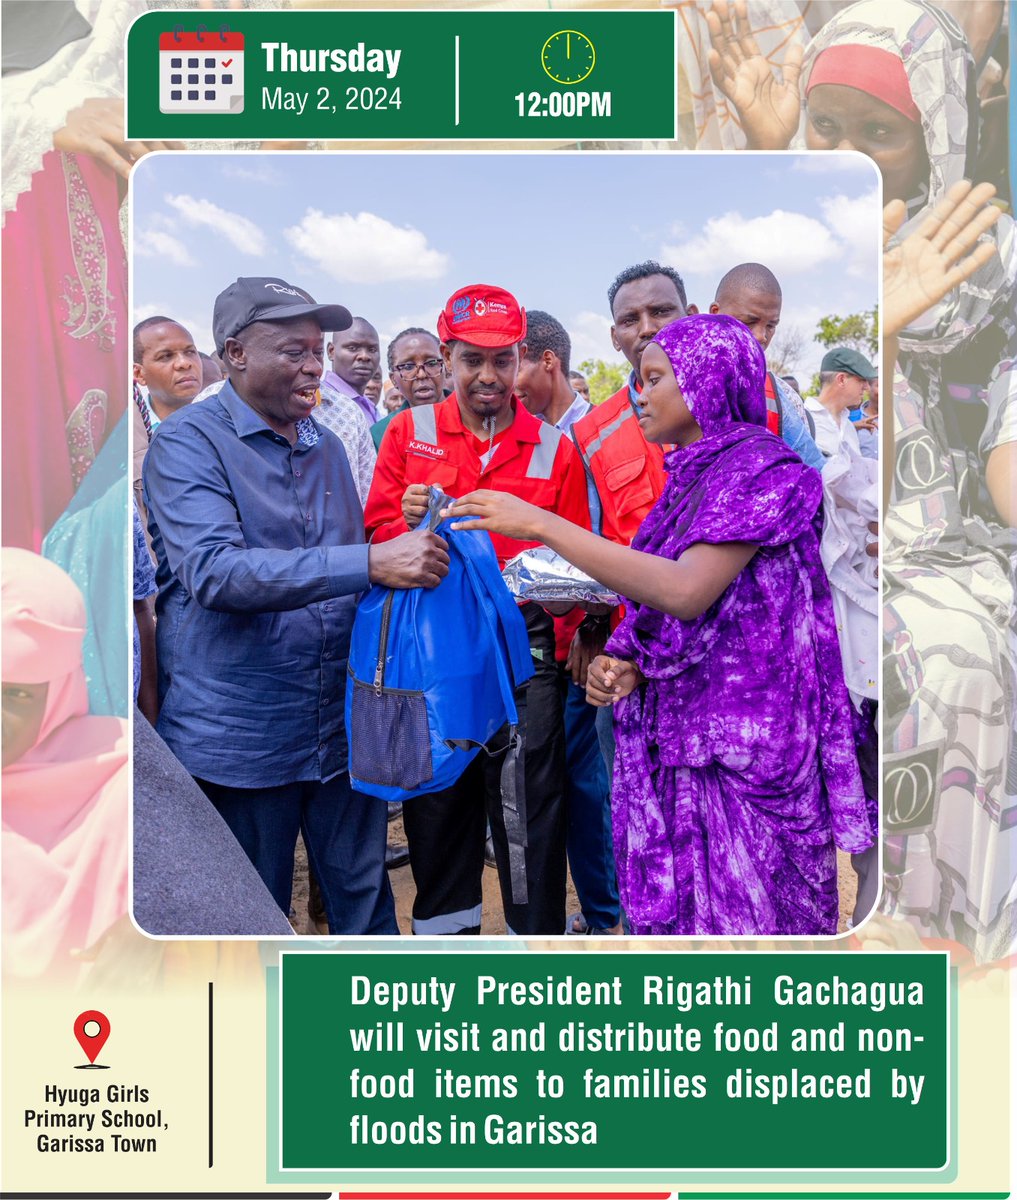 Deputy President Rigathi Gachagua is leading a nationwide response to floods as tasked by the President. He has been to Mathare, Nakuru (Maai Mahiu), Murang’a and today, Garissa to comfort those affected on top of assessing and consolidating response.